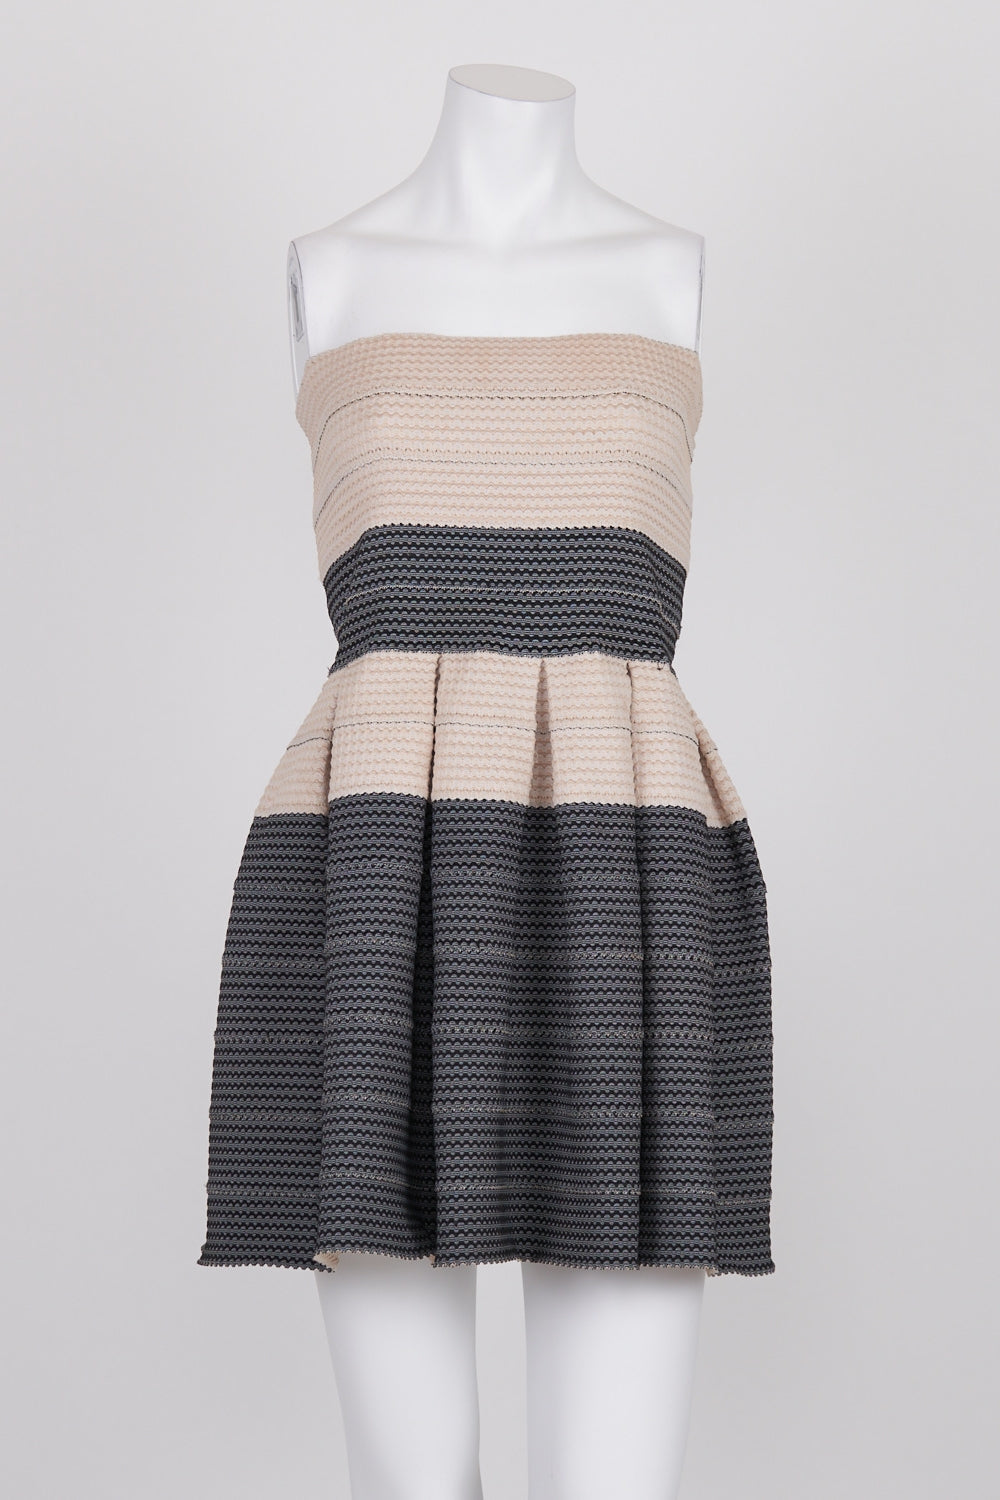 Cooper St Patterned Strapless Pleated Dress 12